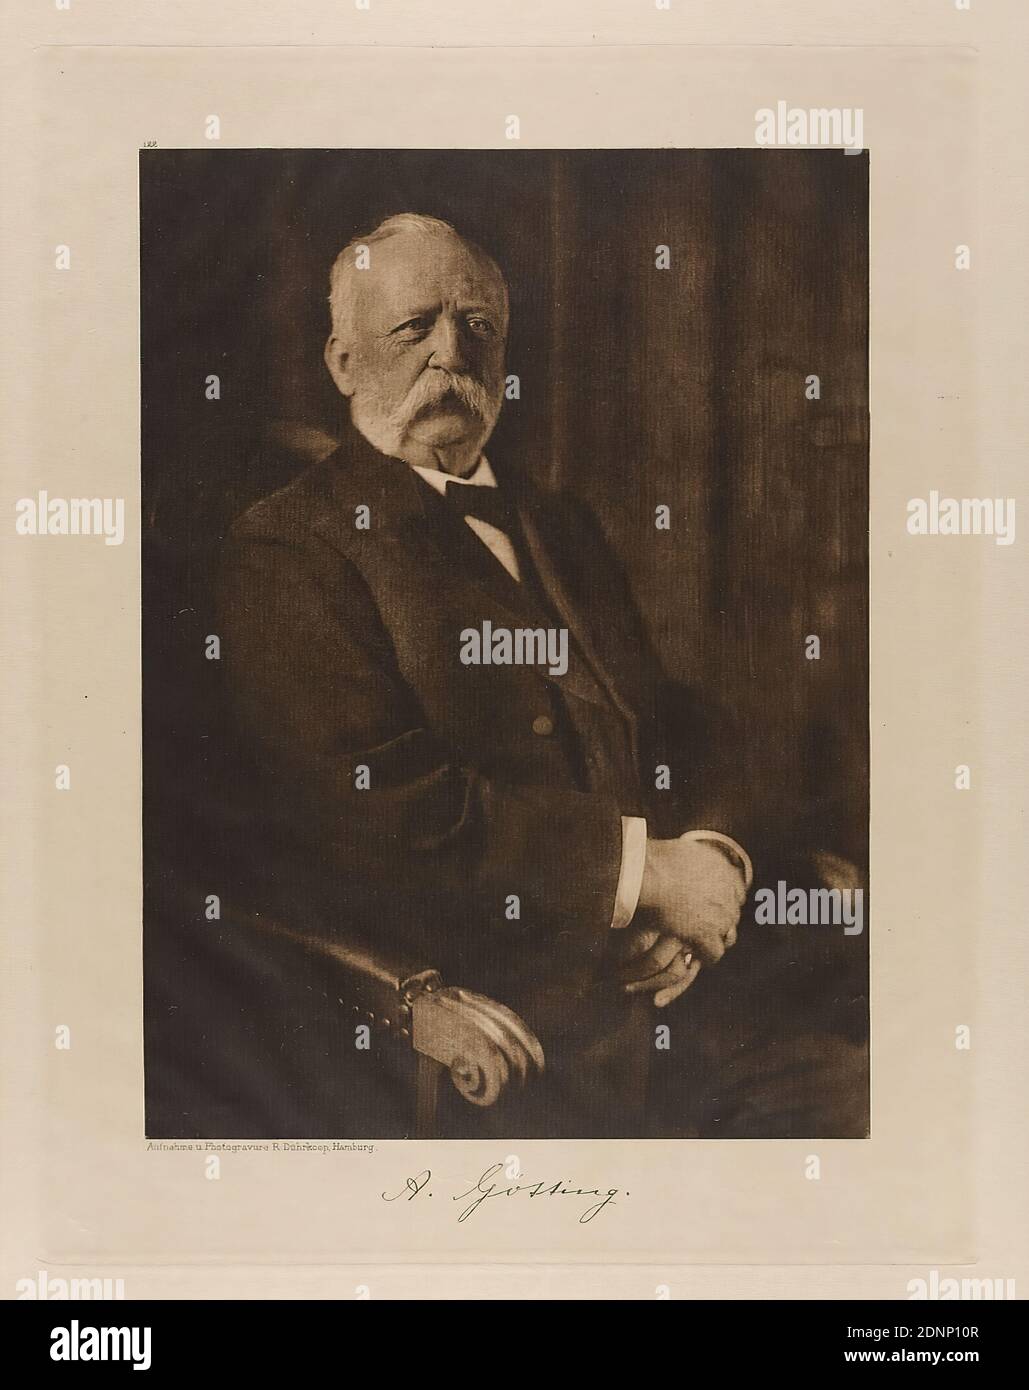 Rudolph Dührkoop, A. Götting, Director of the Hamburger Freihafen-Lagerhaus-Gesellschaft from the portfolio Hamburgische Männer und Frauen am Anfang des XX. Century, Staatliche Landesbildstelle Hamburg, Collection on the history of photography, paper, heliogravure, picture size: Height: 22,00 cm; width: 16,00 cm, signed: recto below the picture: Exposed signature of the sitter, inscribed: recto: engraved on printing plate, below the picture: photograph and photogravure R. Dührkoop, Hamburg, top left above picture 122; top right in the corner in lead:59, stamp: recto: handwritten addition: Inv. Stock Photo